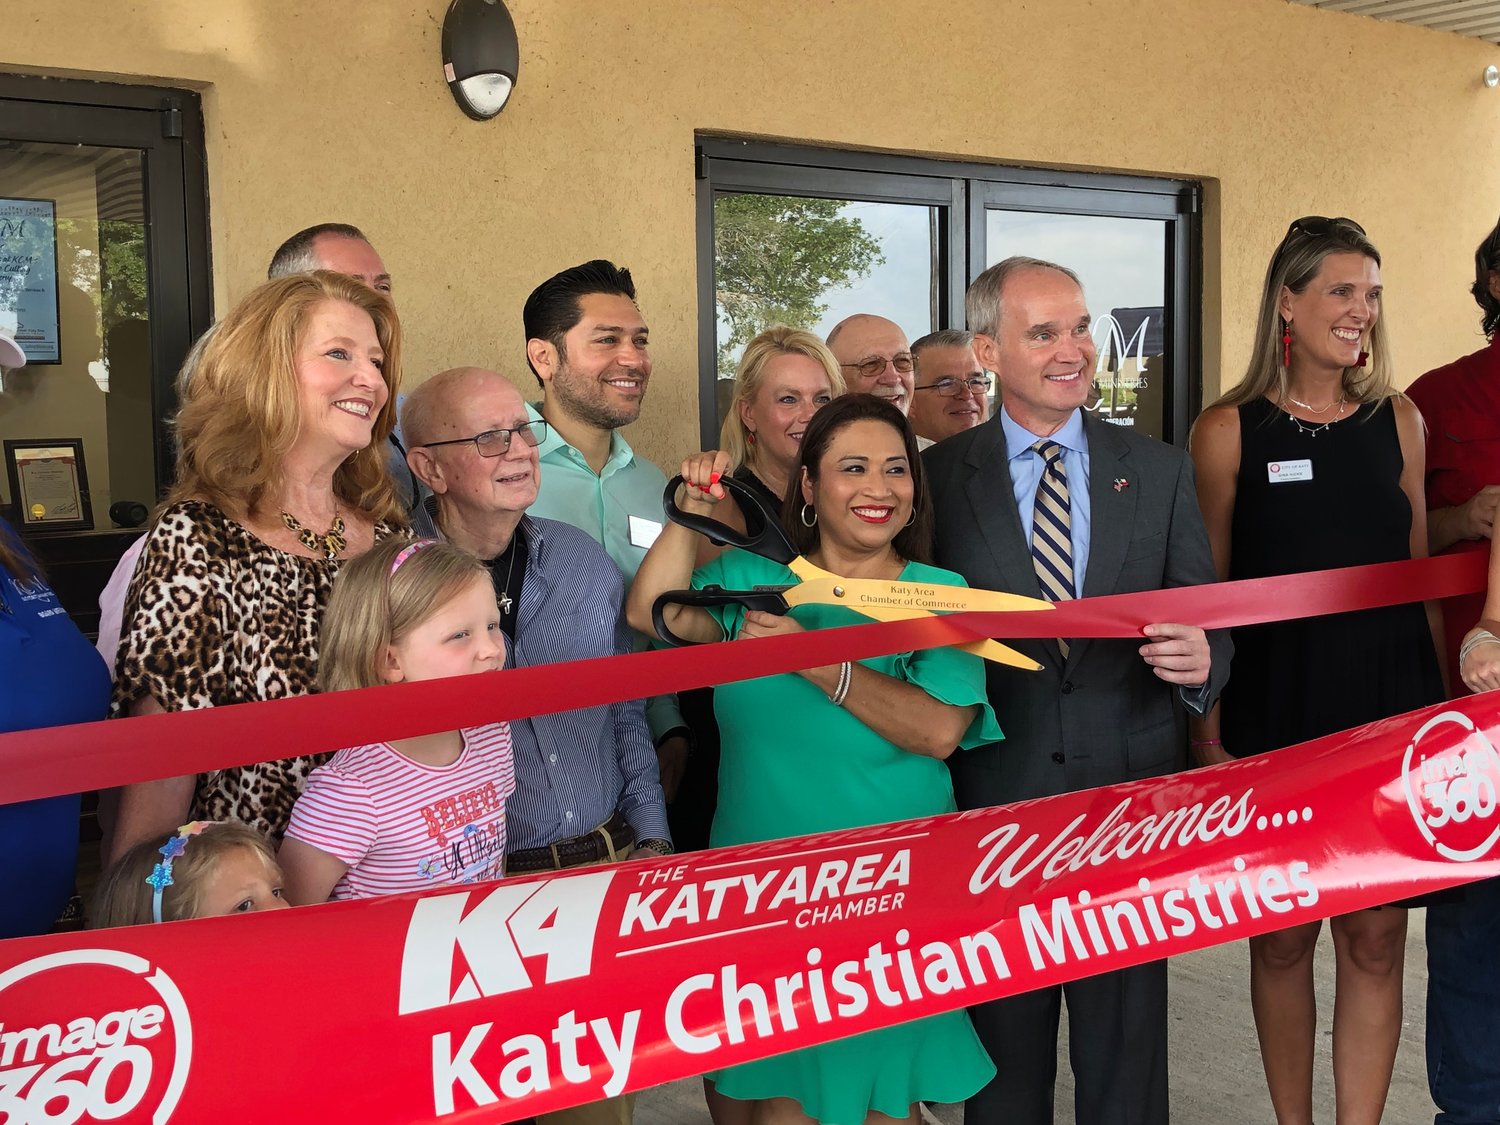 Deysi Crespo, Katy Christian Ministries executive director, prepares to cut the ceremonial ribbon provided by the Katy Area Chamber of Commerce. KCM Board parliamentarian and past president Patty Lacy stands at left. State Rep. Mike Schofield, R-Houston, and Katy Ward B Council Member Gina Hicks stand at Crespo’s left.